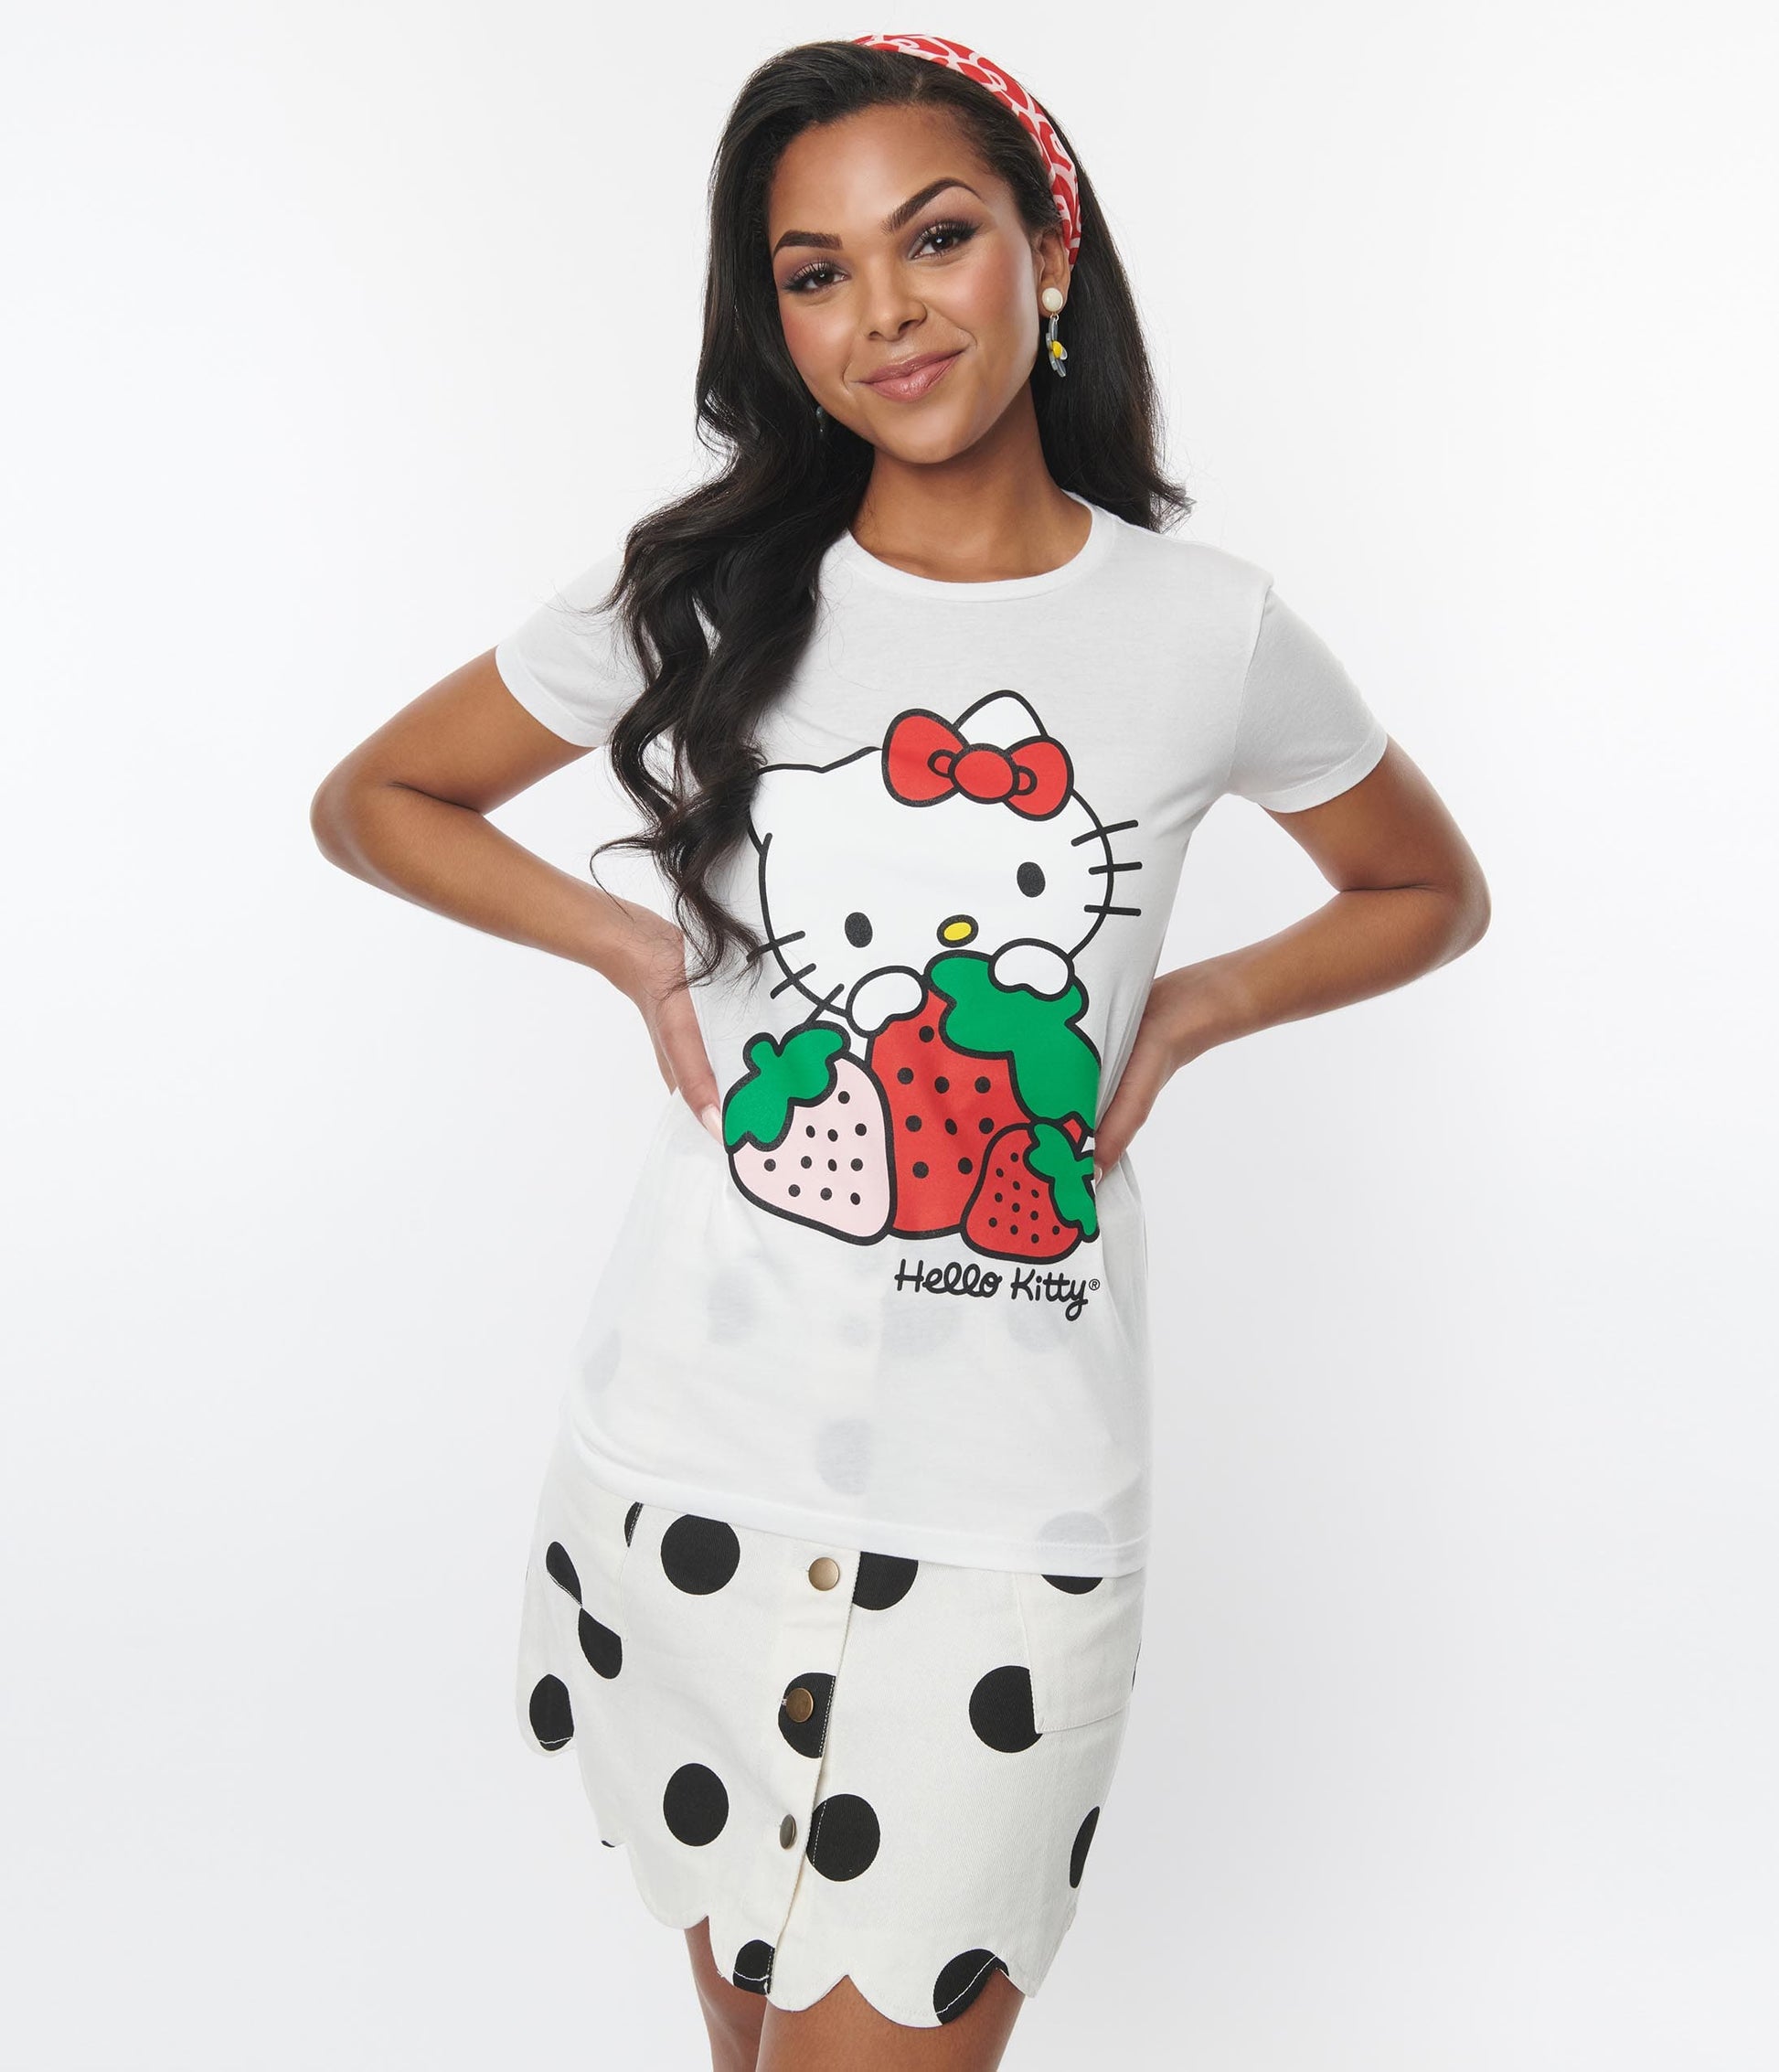 Hello Kitty x Smak Parlour Strawberry Fitted Tee